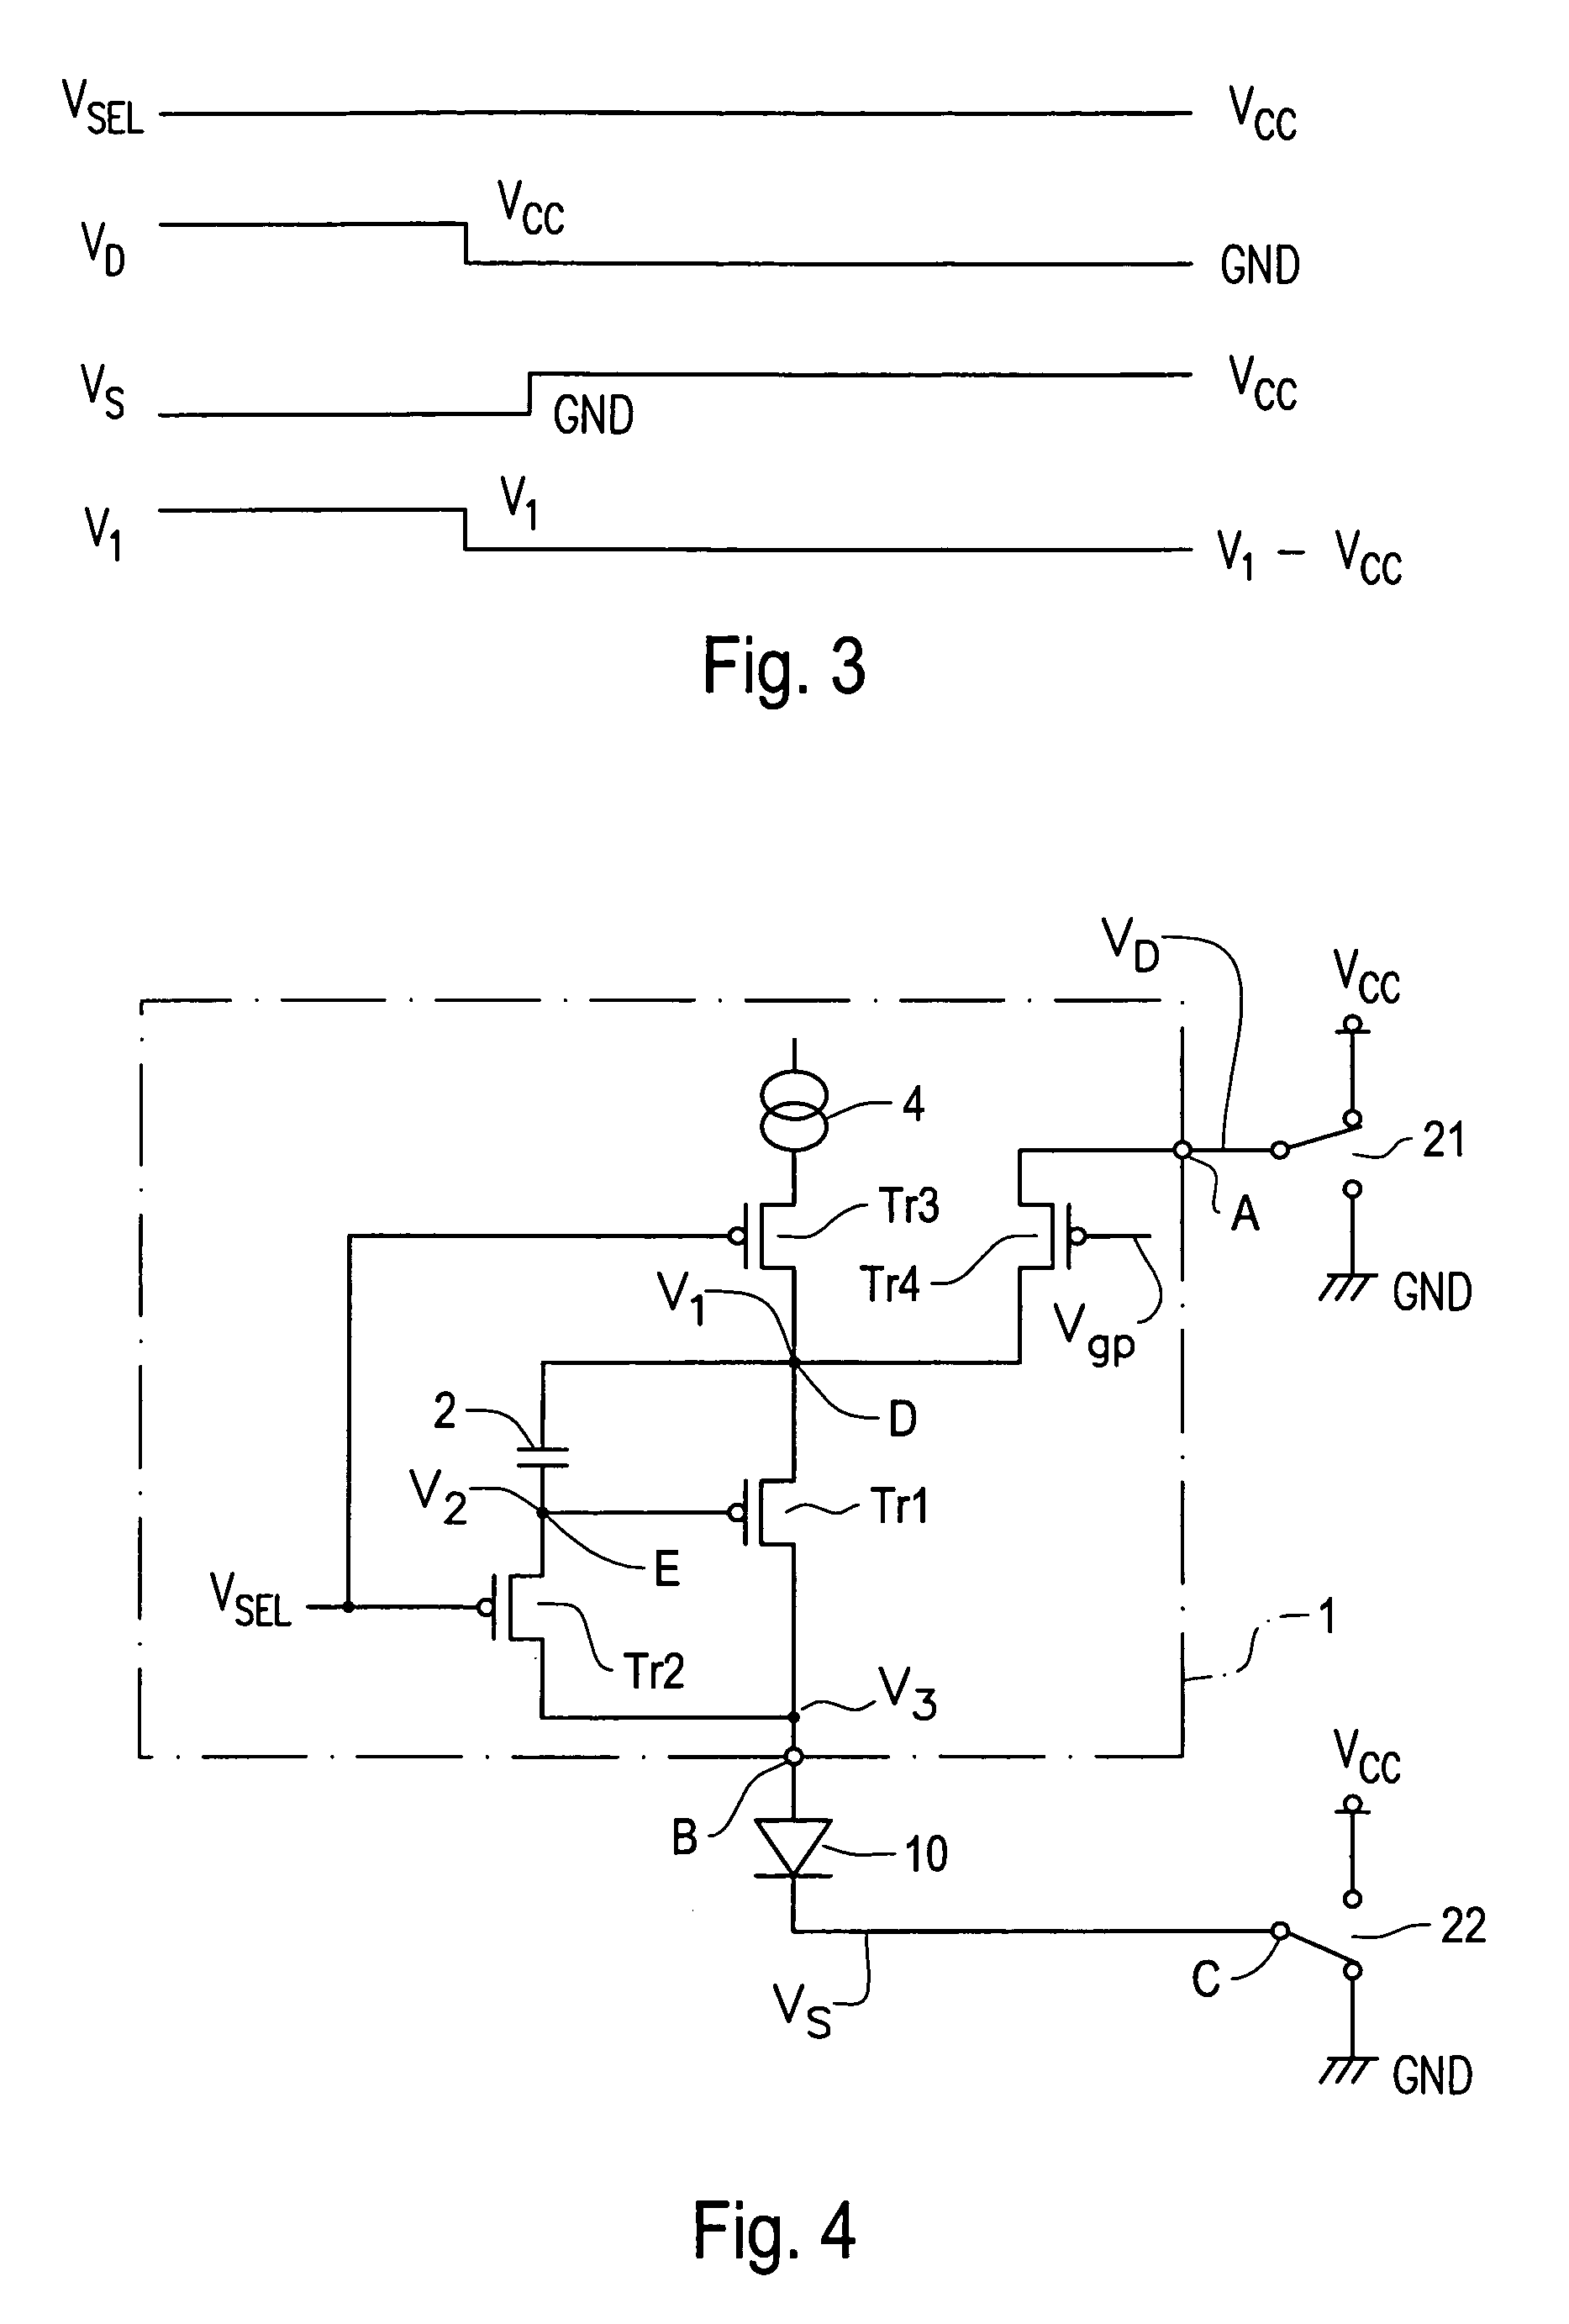 System and methods for providing a driving circuit for active matrix type displays